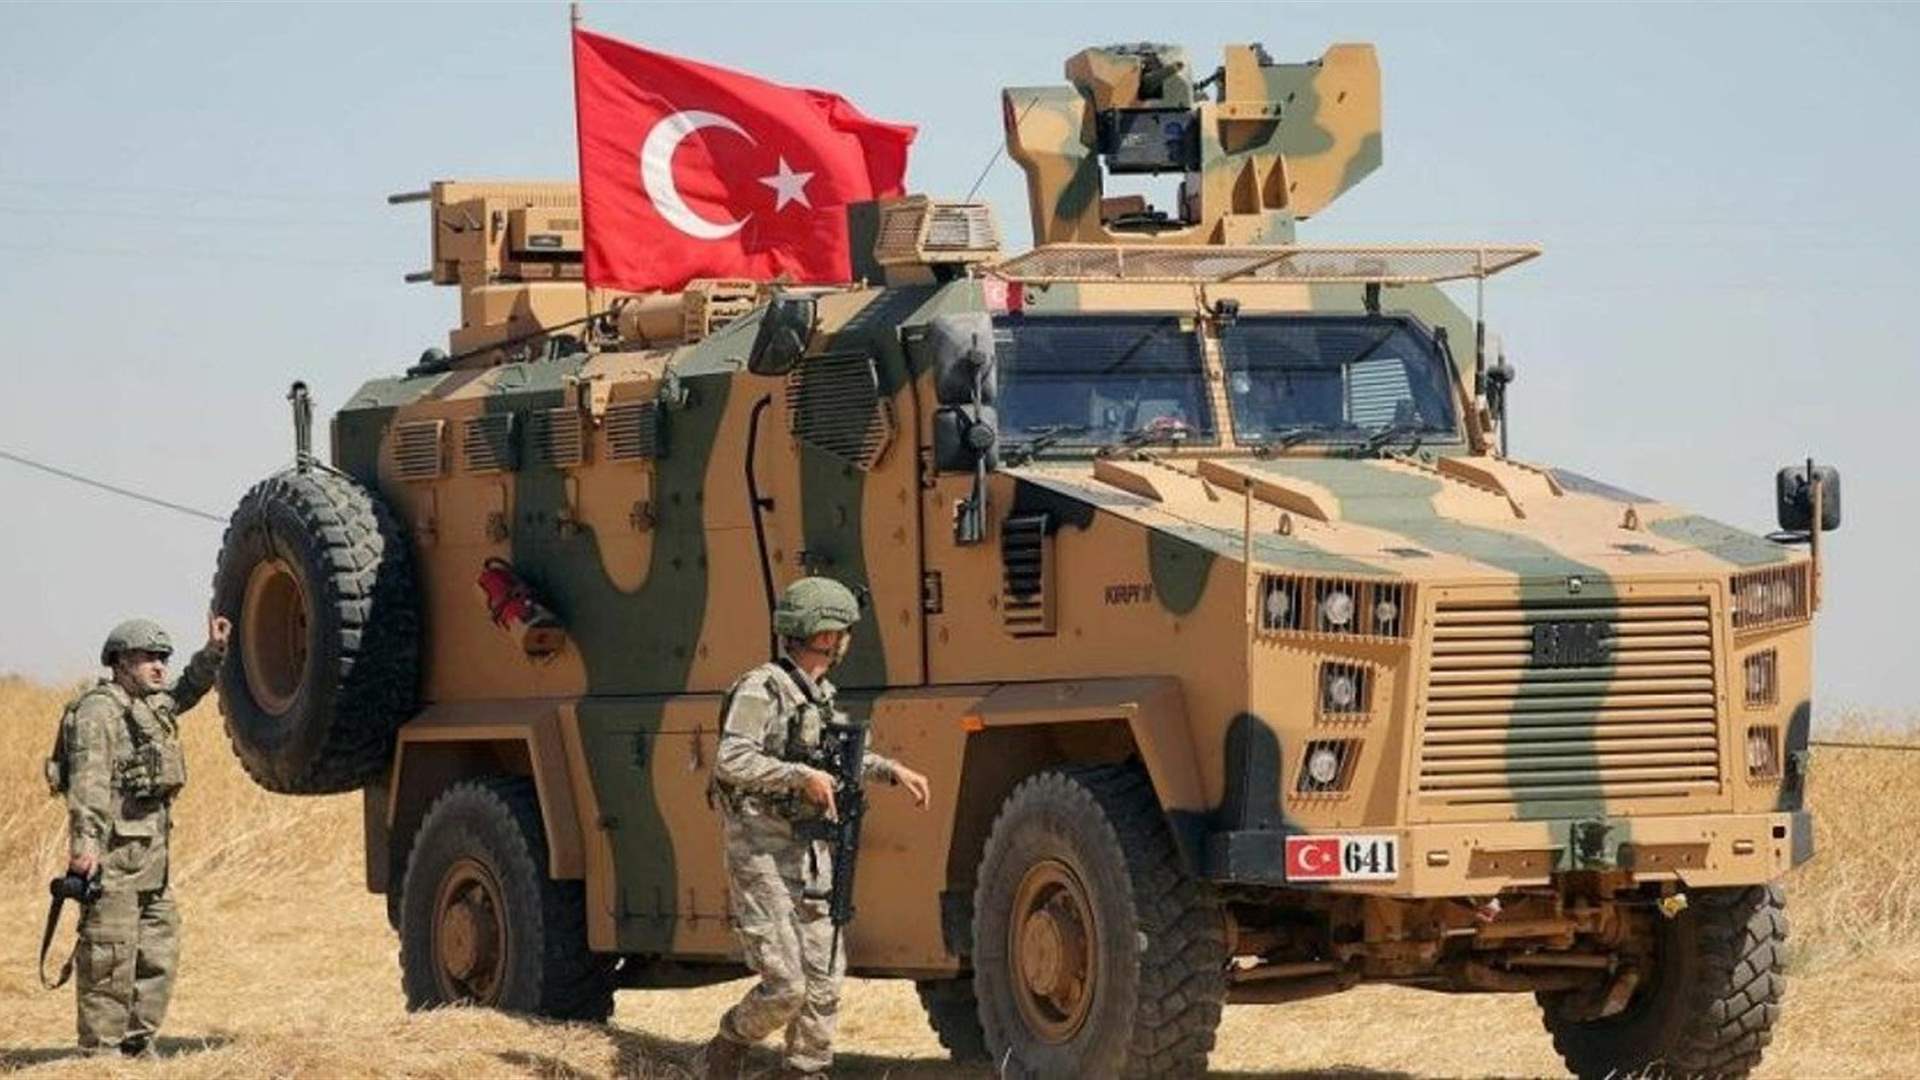 Turkish soldier died in Iraq clash, defence ministry says